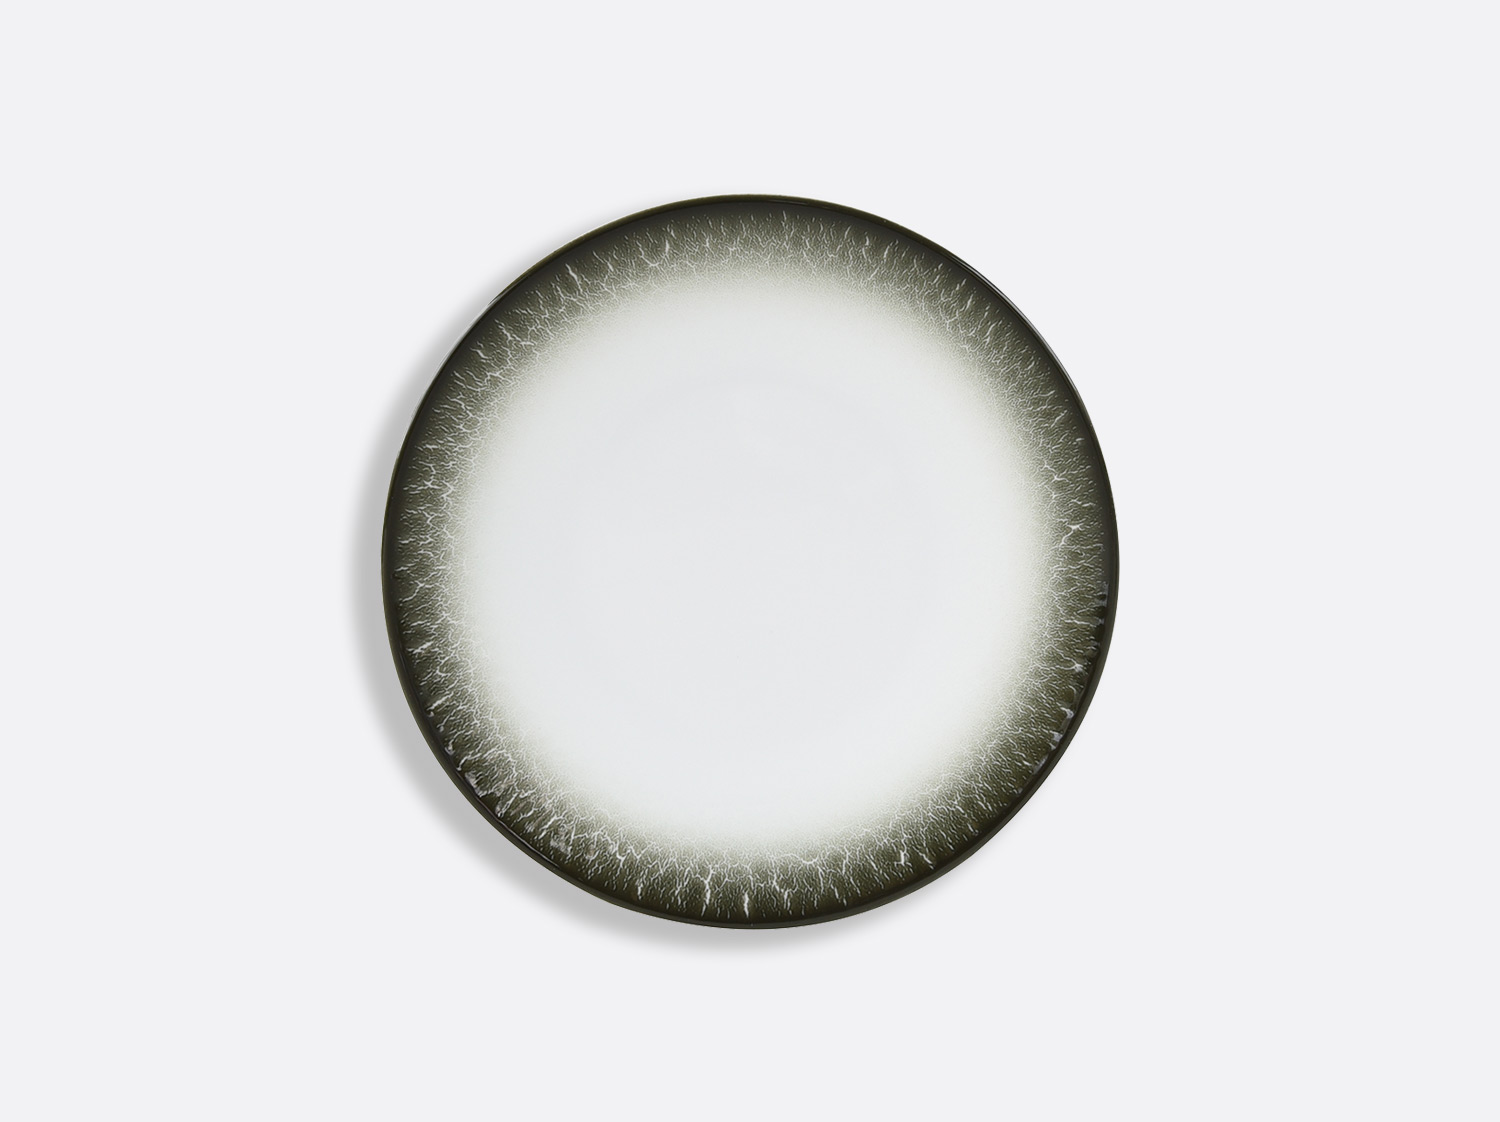 China Coupe plate 6.5" of the collection TERRA LICHEN | Bernardaud